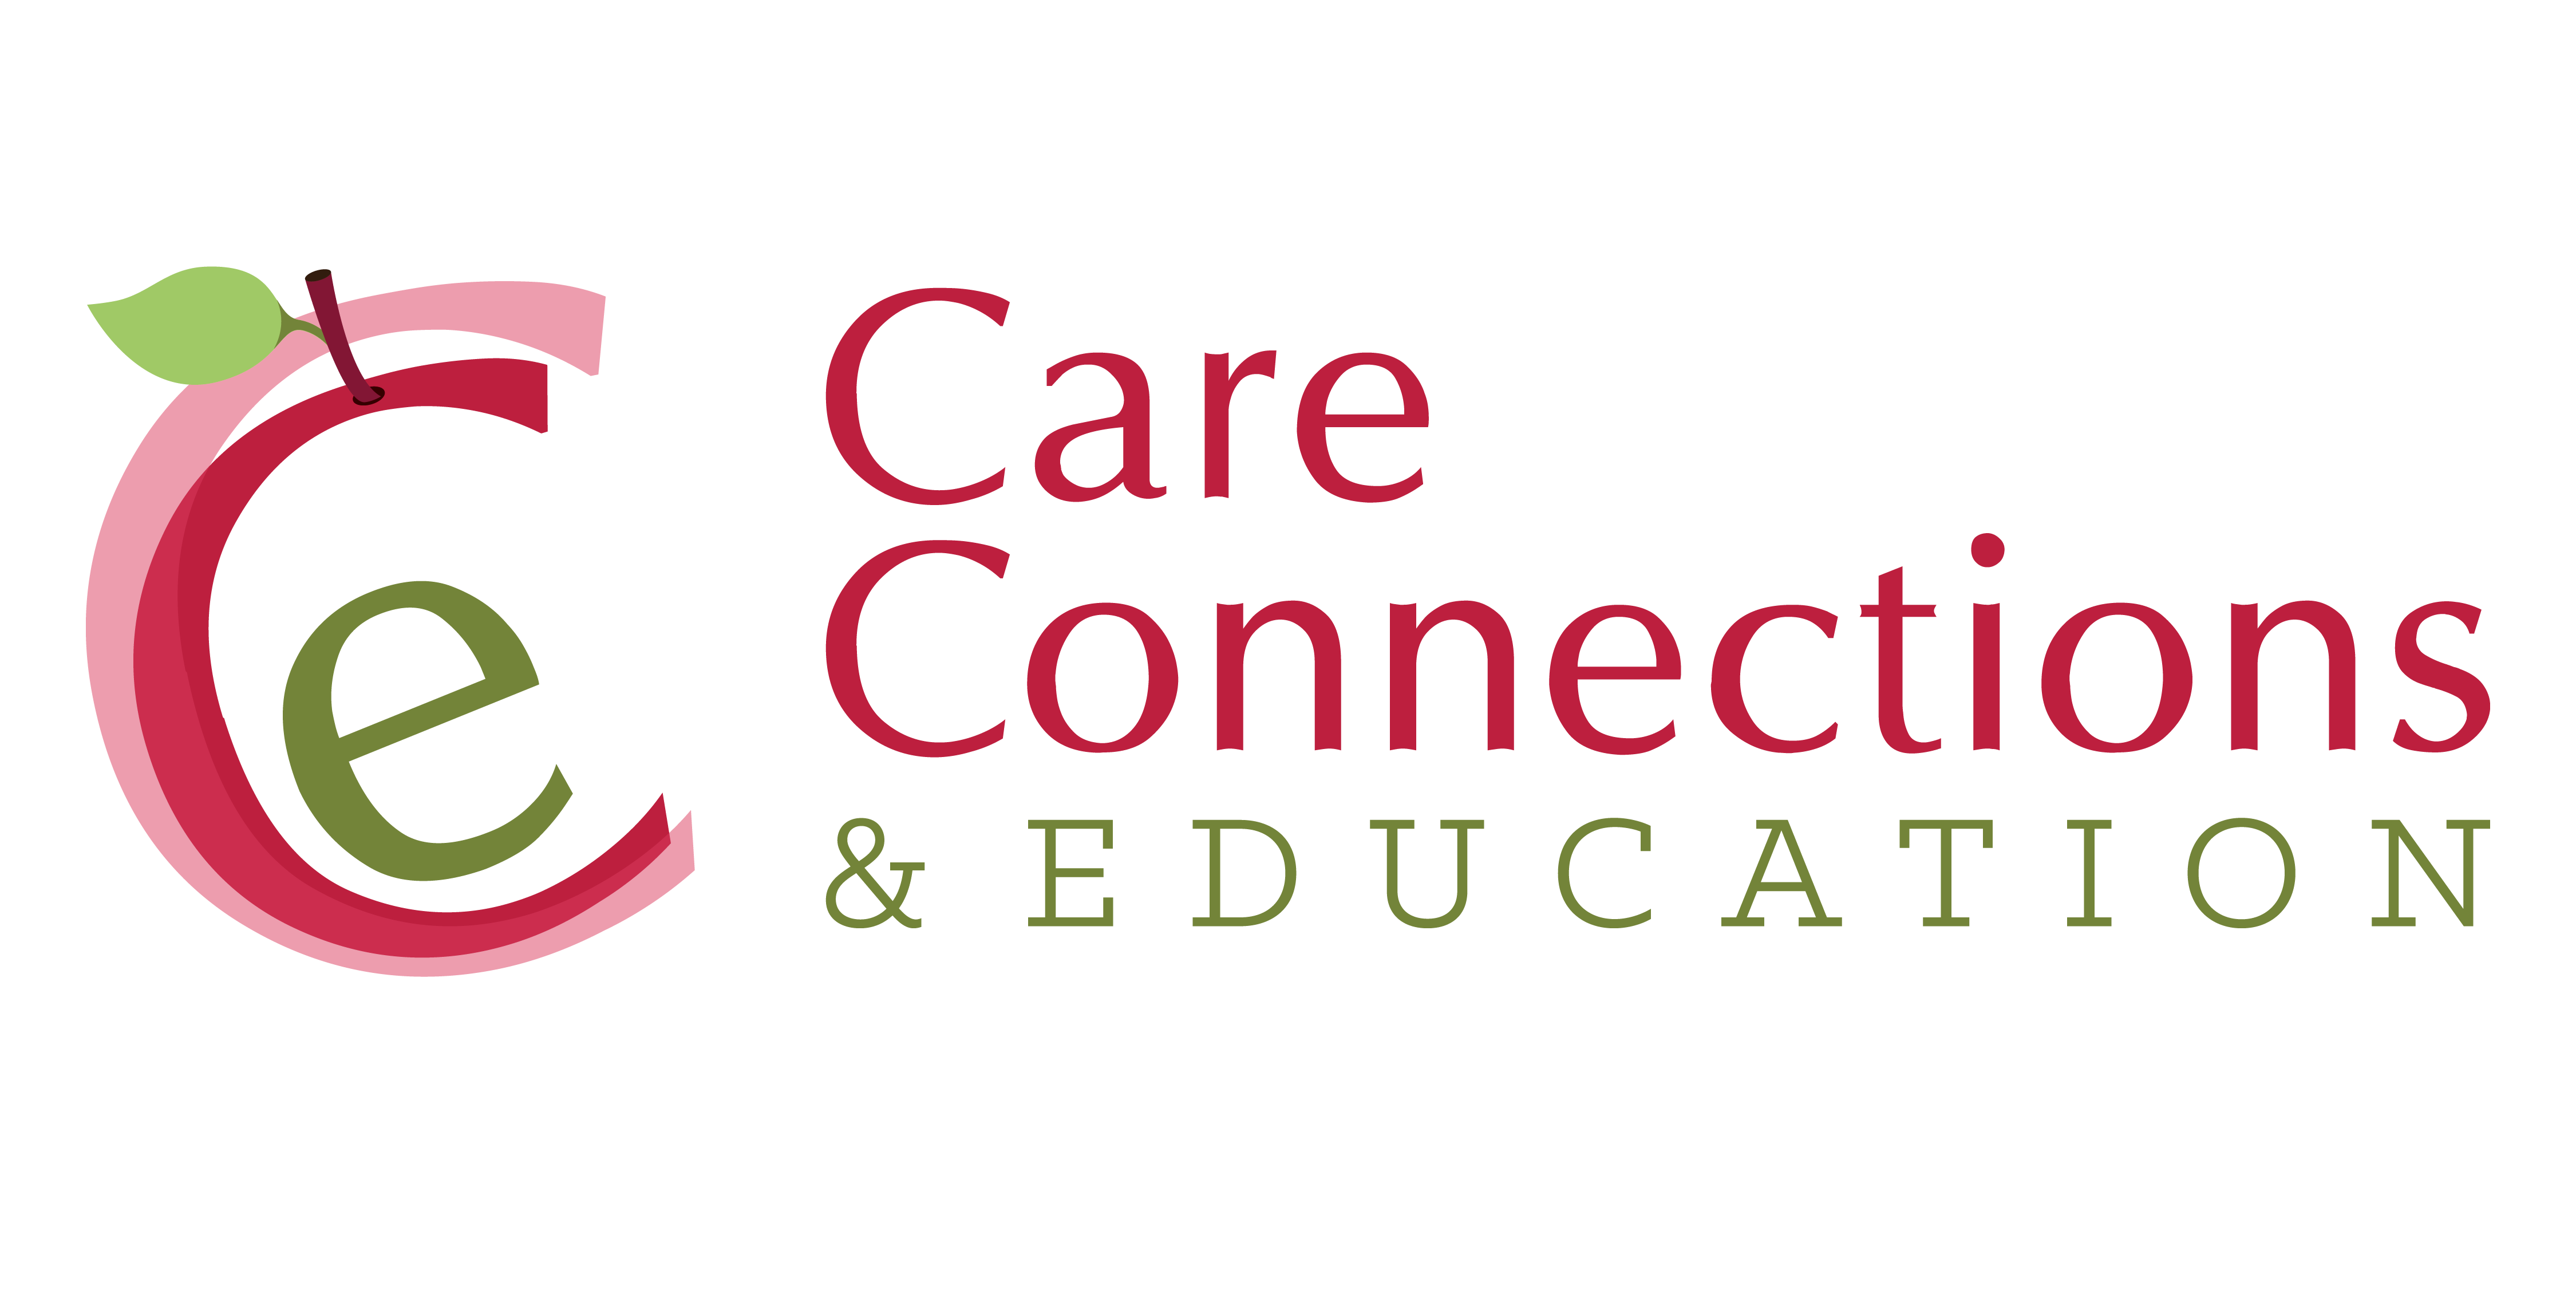 Care Connections and Education